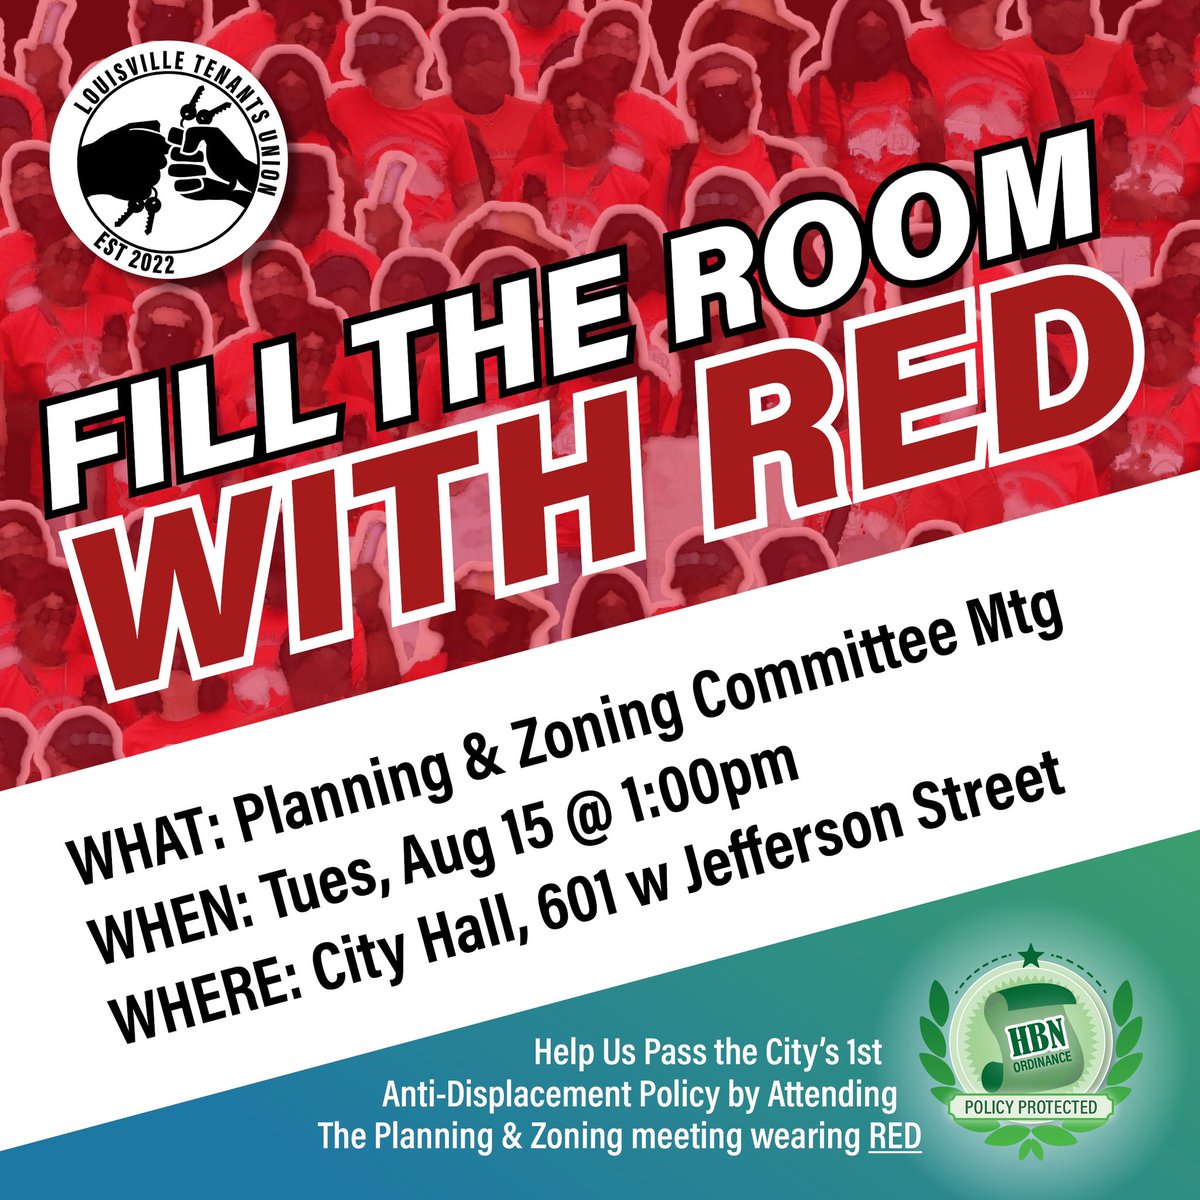 [Action Alert] The Rent's Too Damn High! Help us pass #Louisville 's 1st Anti-Displacement #FairHousing ordinance by standing with residents on Aug 15th @ 1:00 pm at City Hall. Wear RED!  #HBNO #PolicyProtected  #EndCorporateWelfare  #STOPGentrification